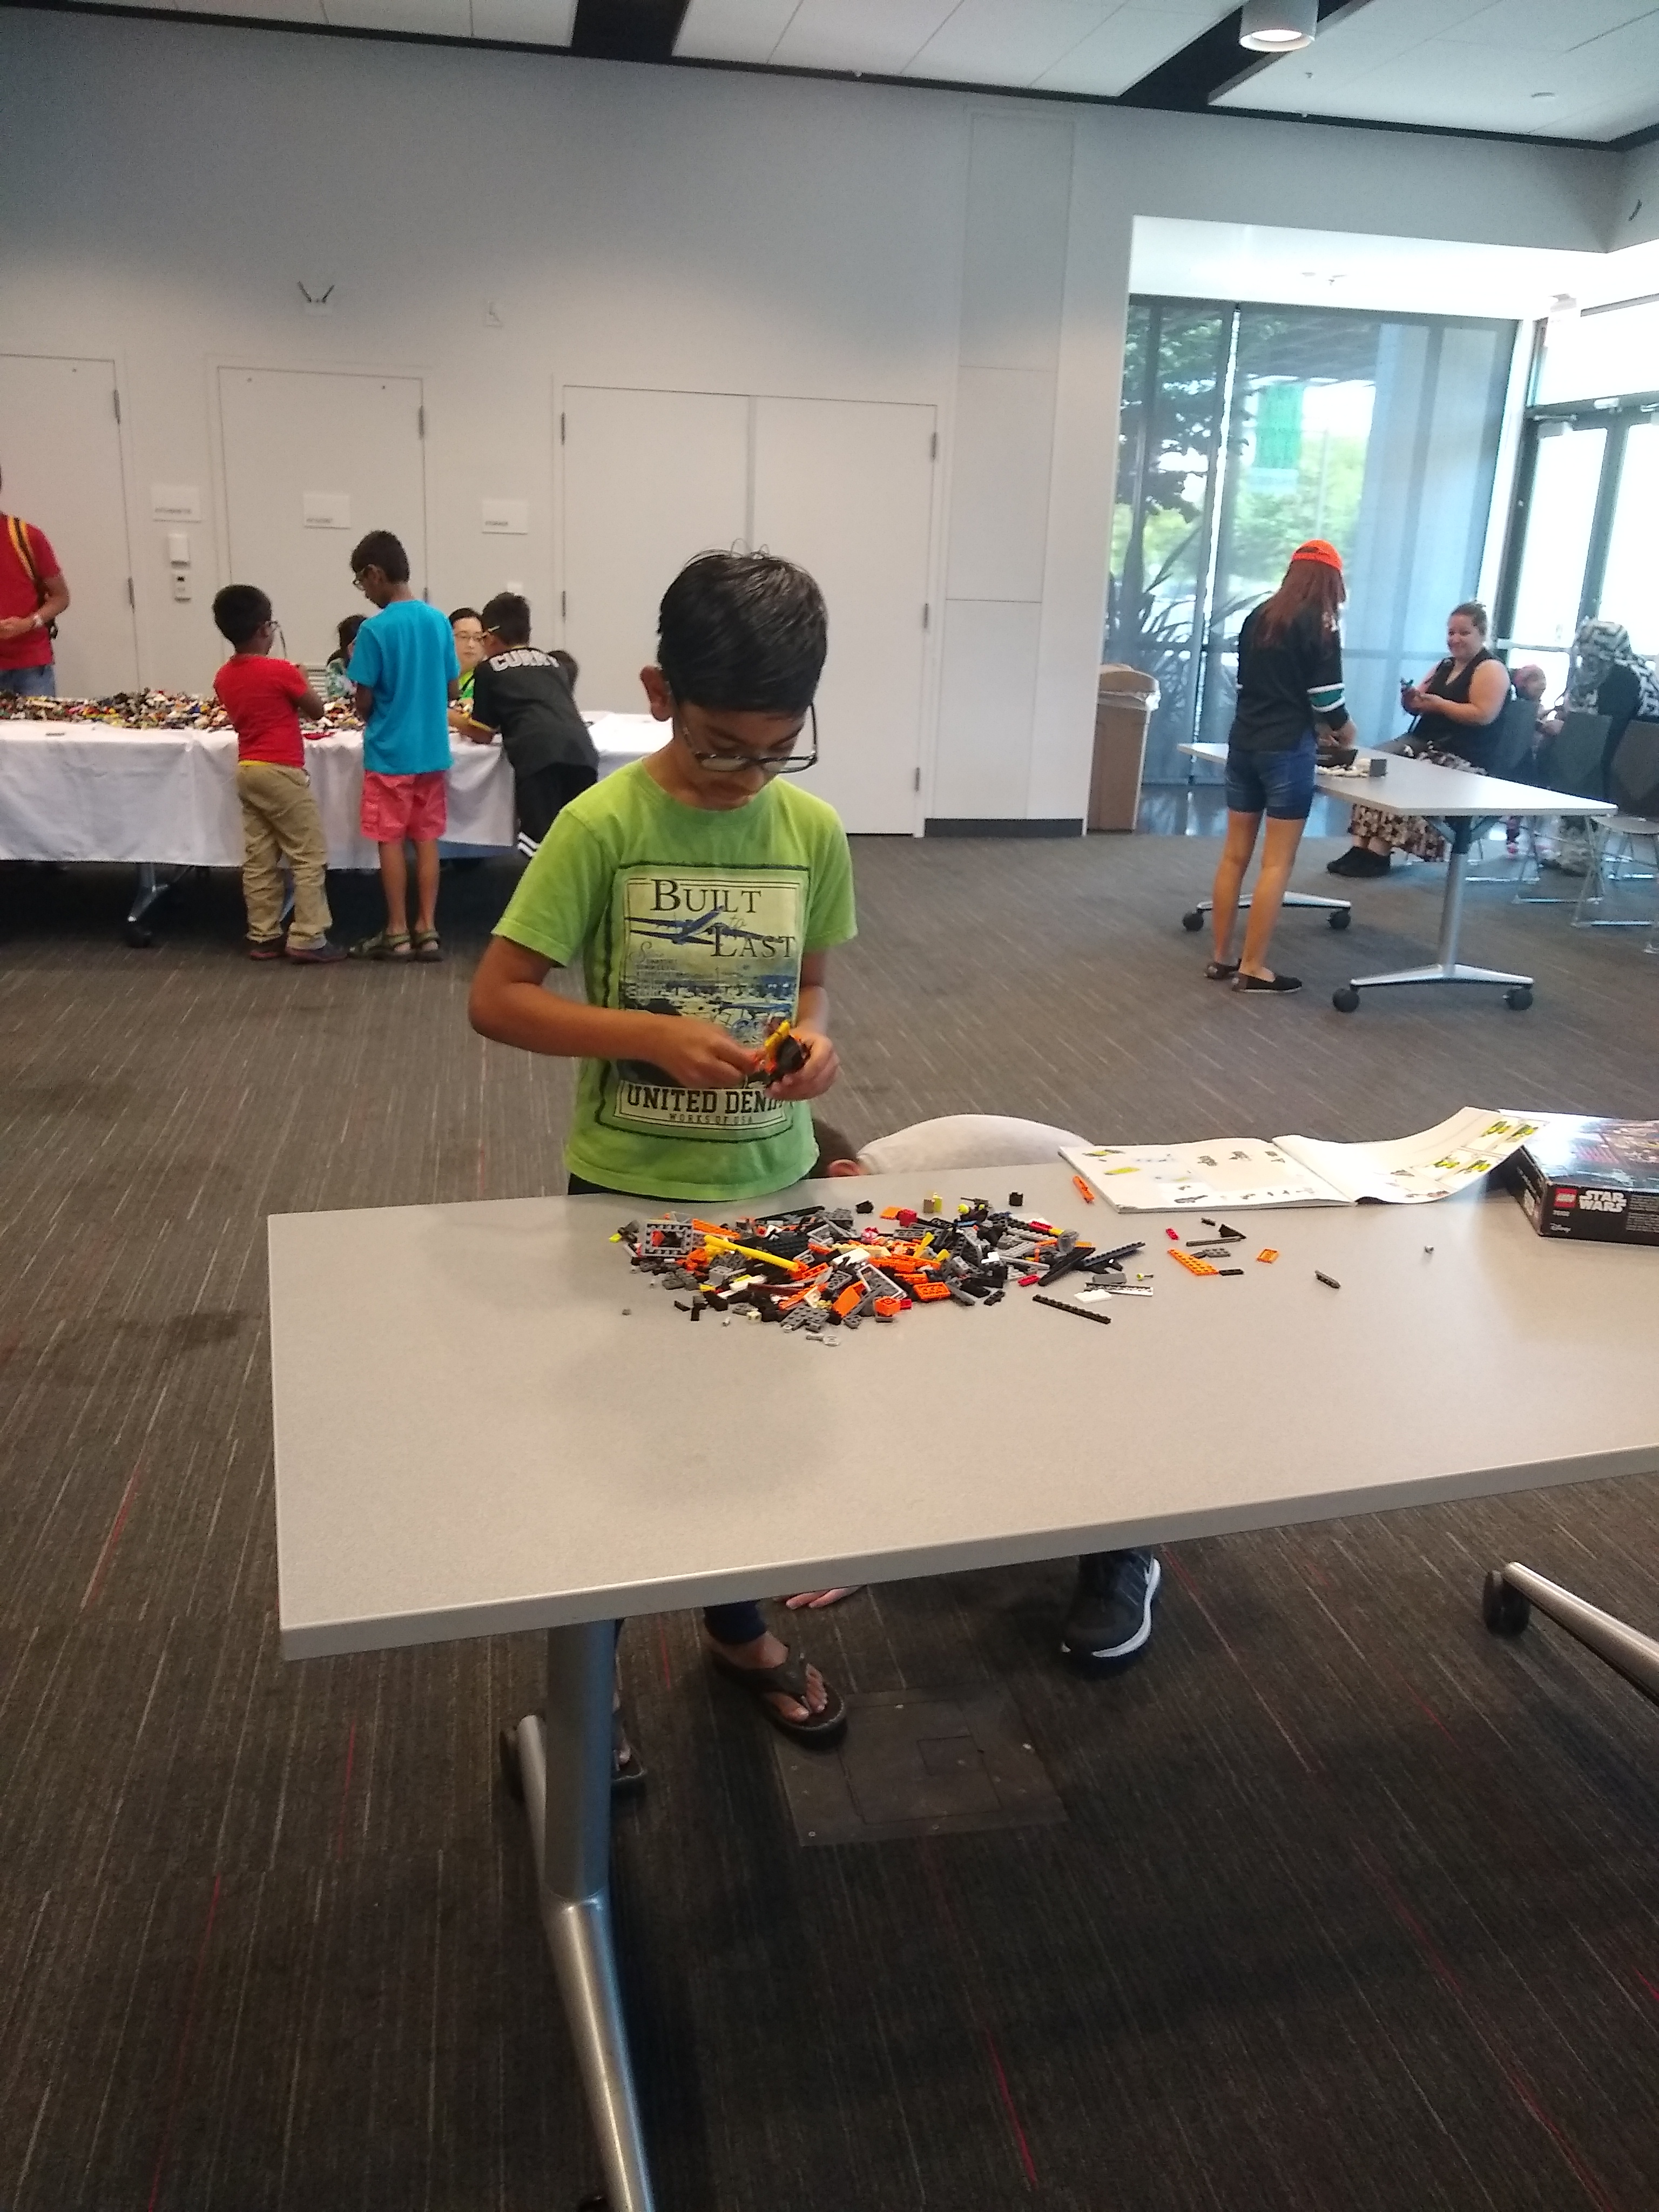 Me at a libary lego event